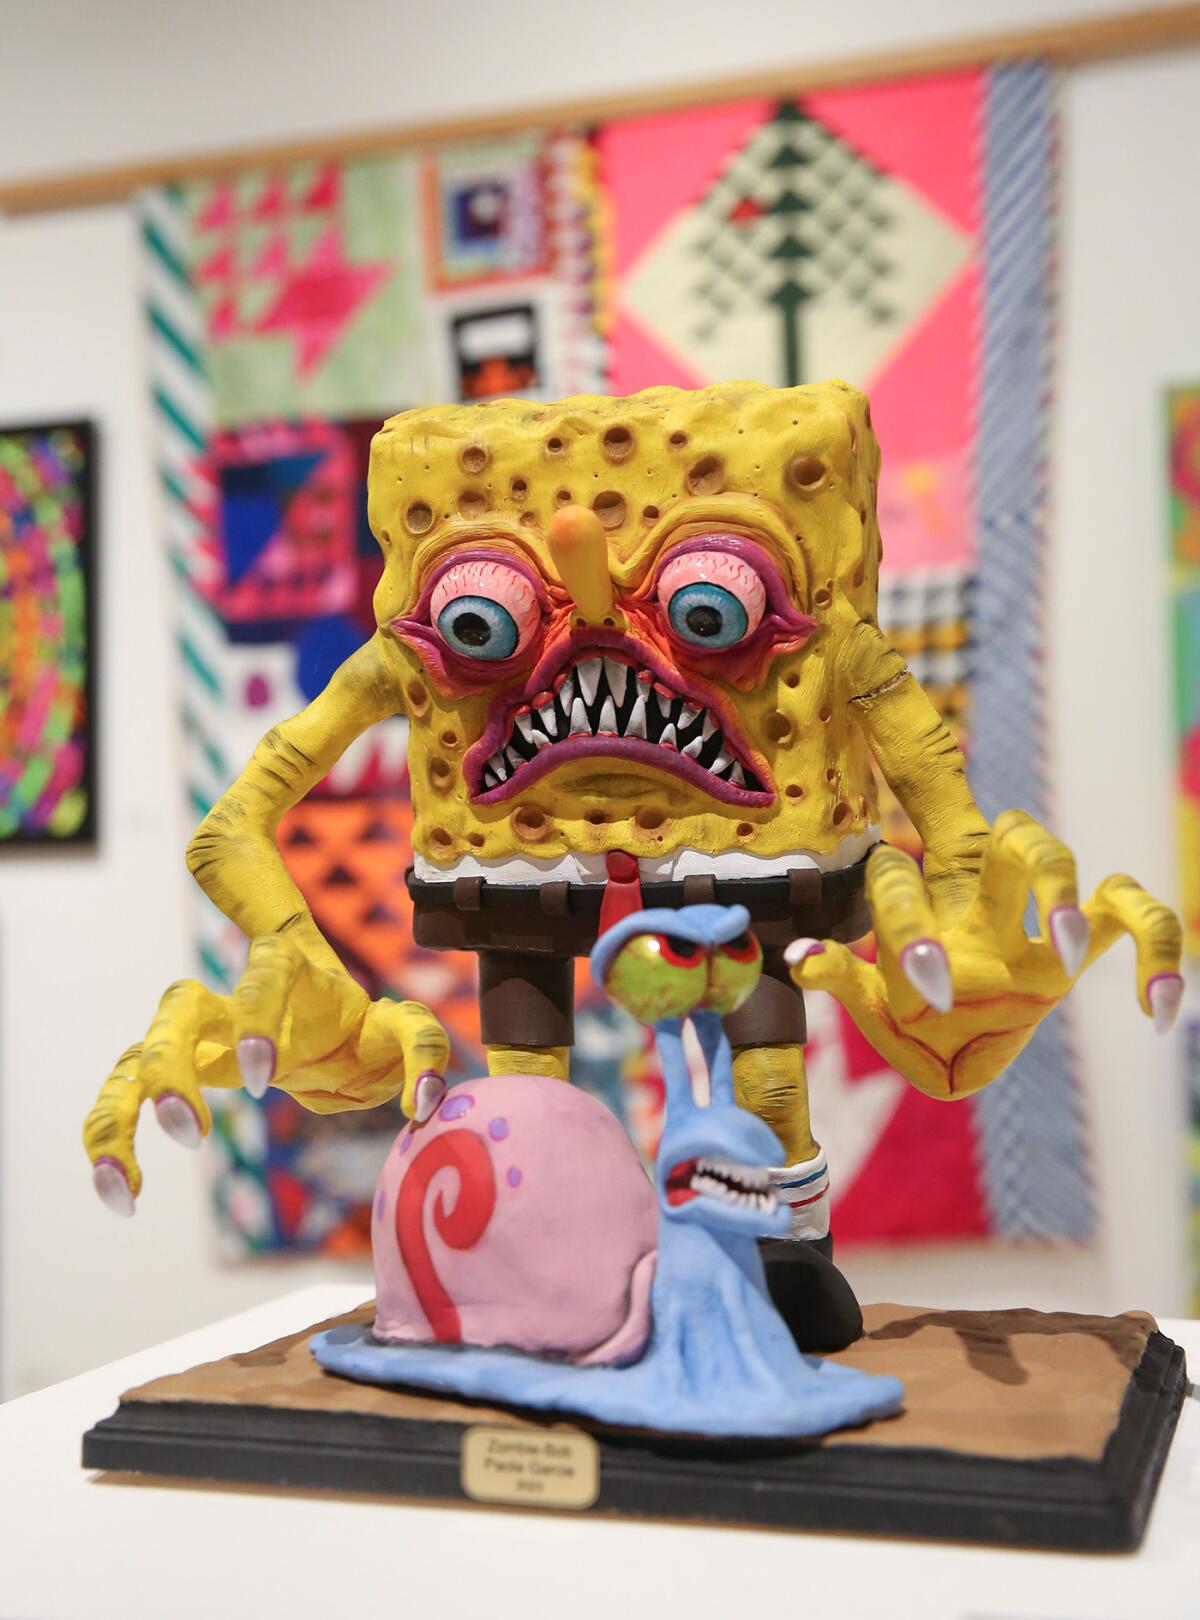 Wendy Soto Garcia's "Zombie Bob" is featured in the "Centered on the Center" exhibition.